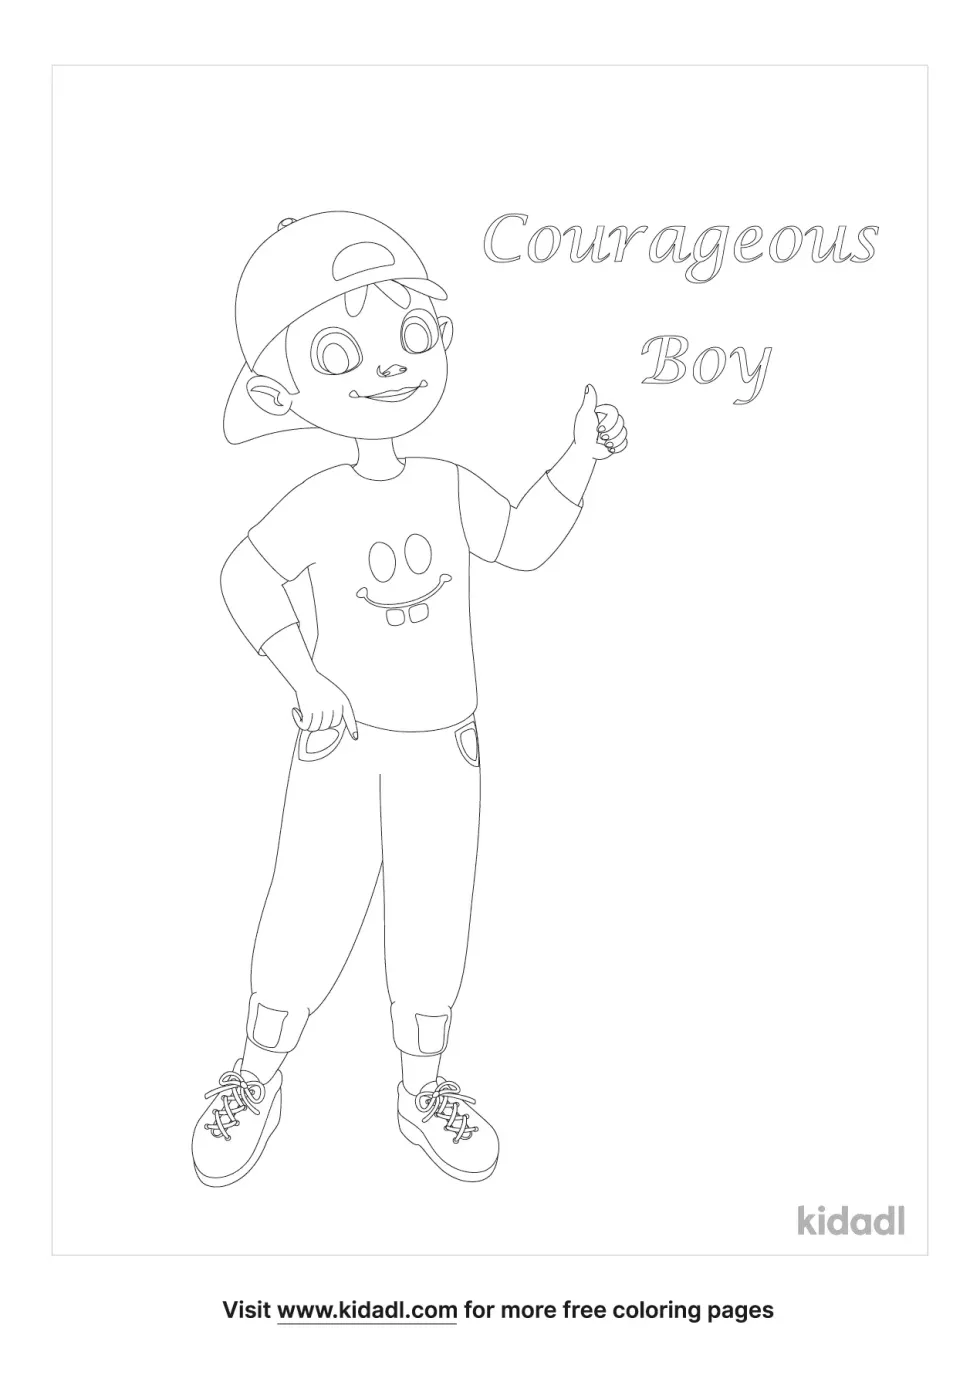 Boy Being Courageous Coloring Page